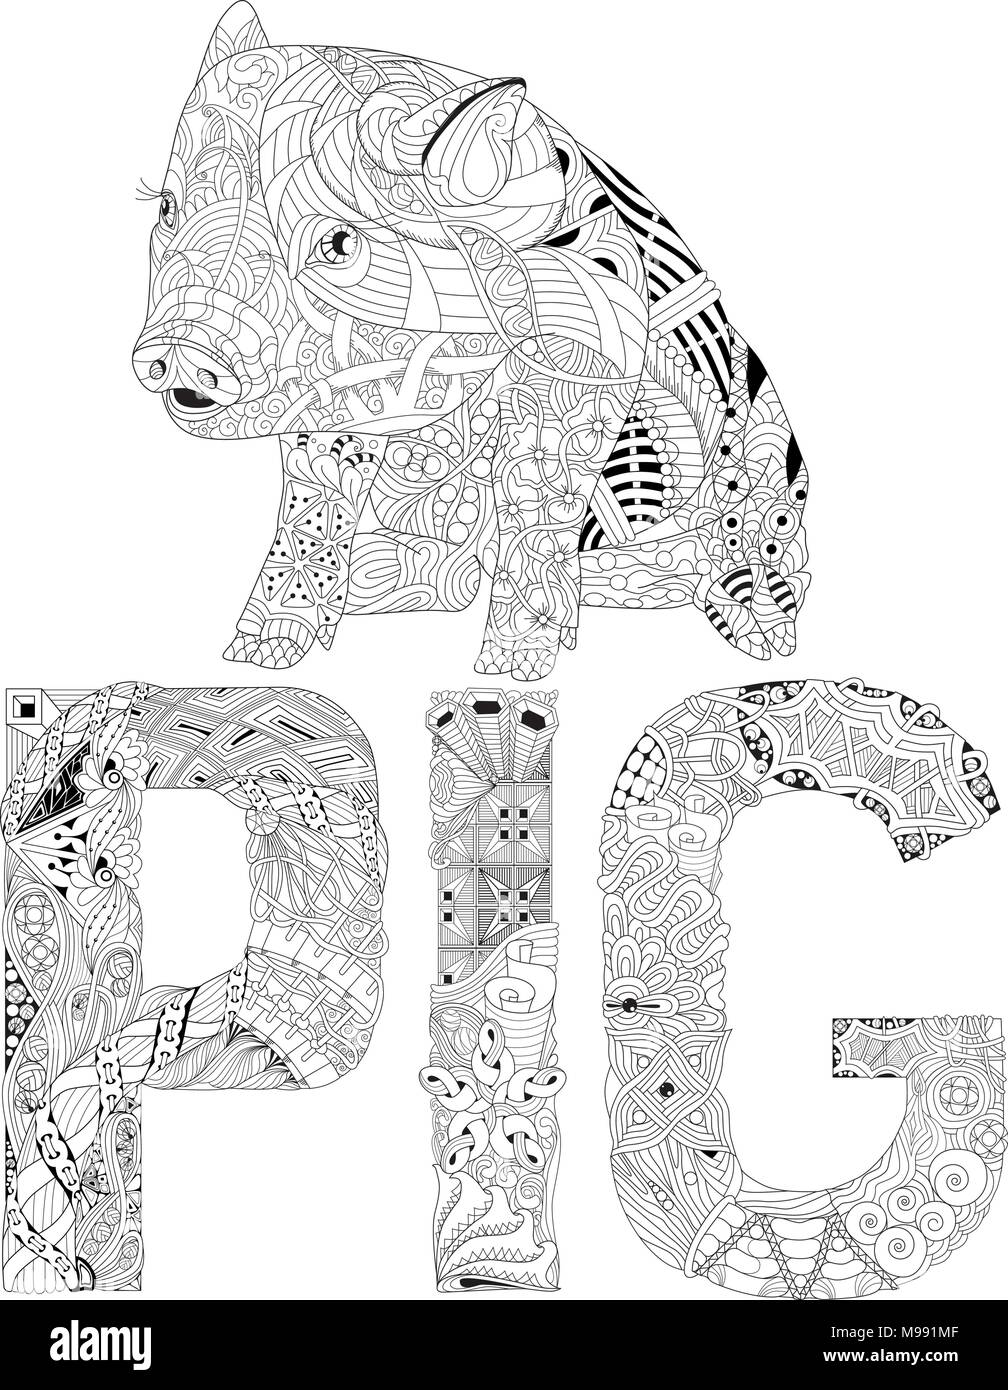 Zentangle illustration with pig. Zen tangle or doodle piglet. Coloring book domestic animal. Stock Vector